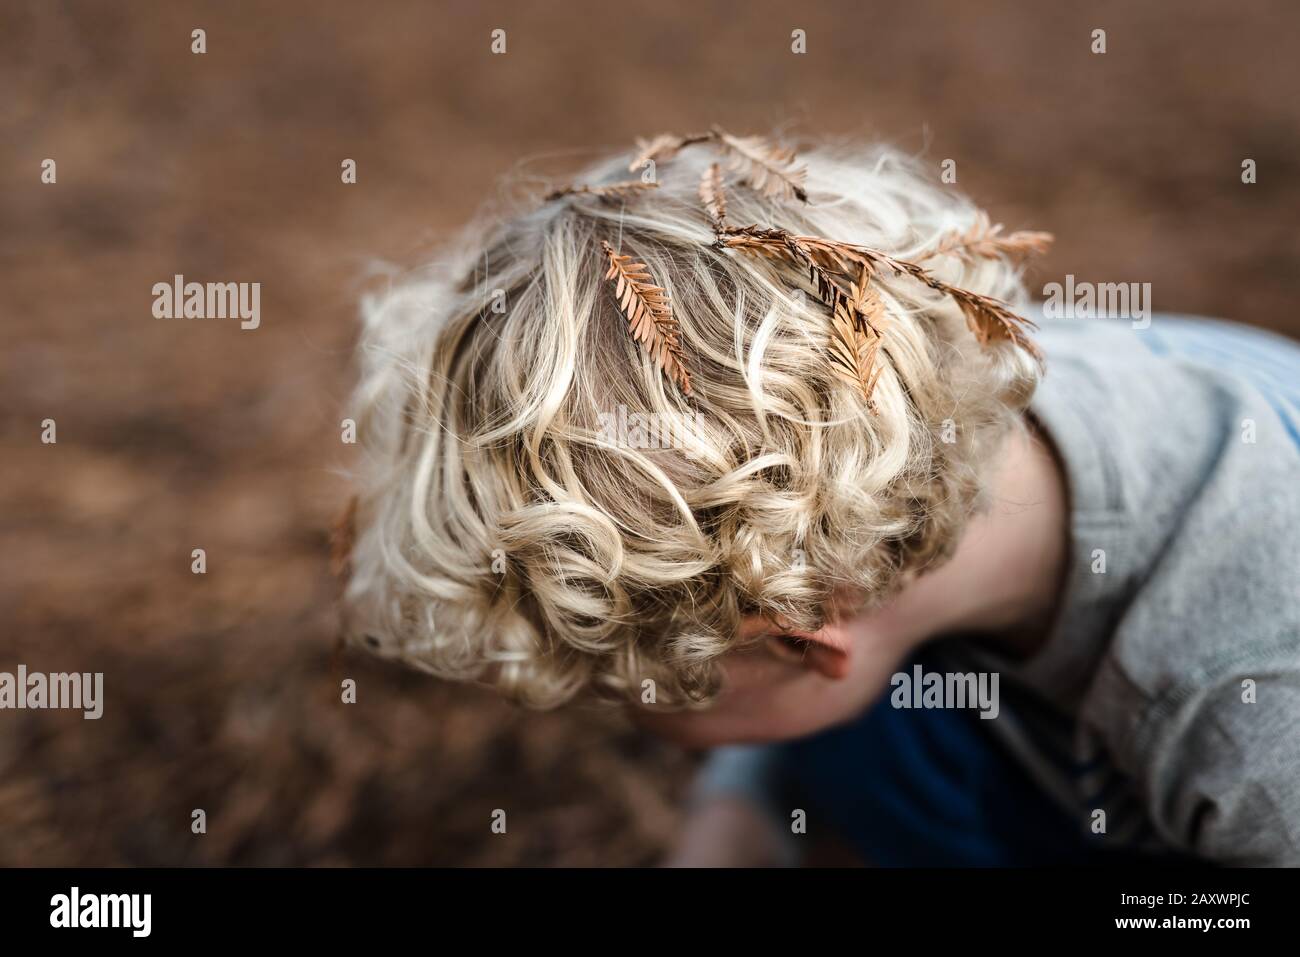 Pine needle leaves on head of curly haired child Stock Photo